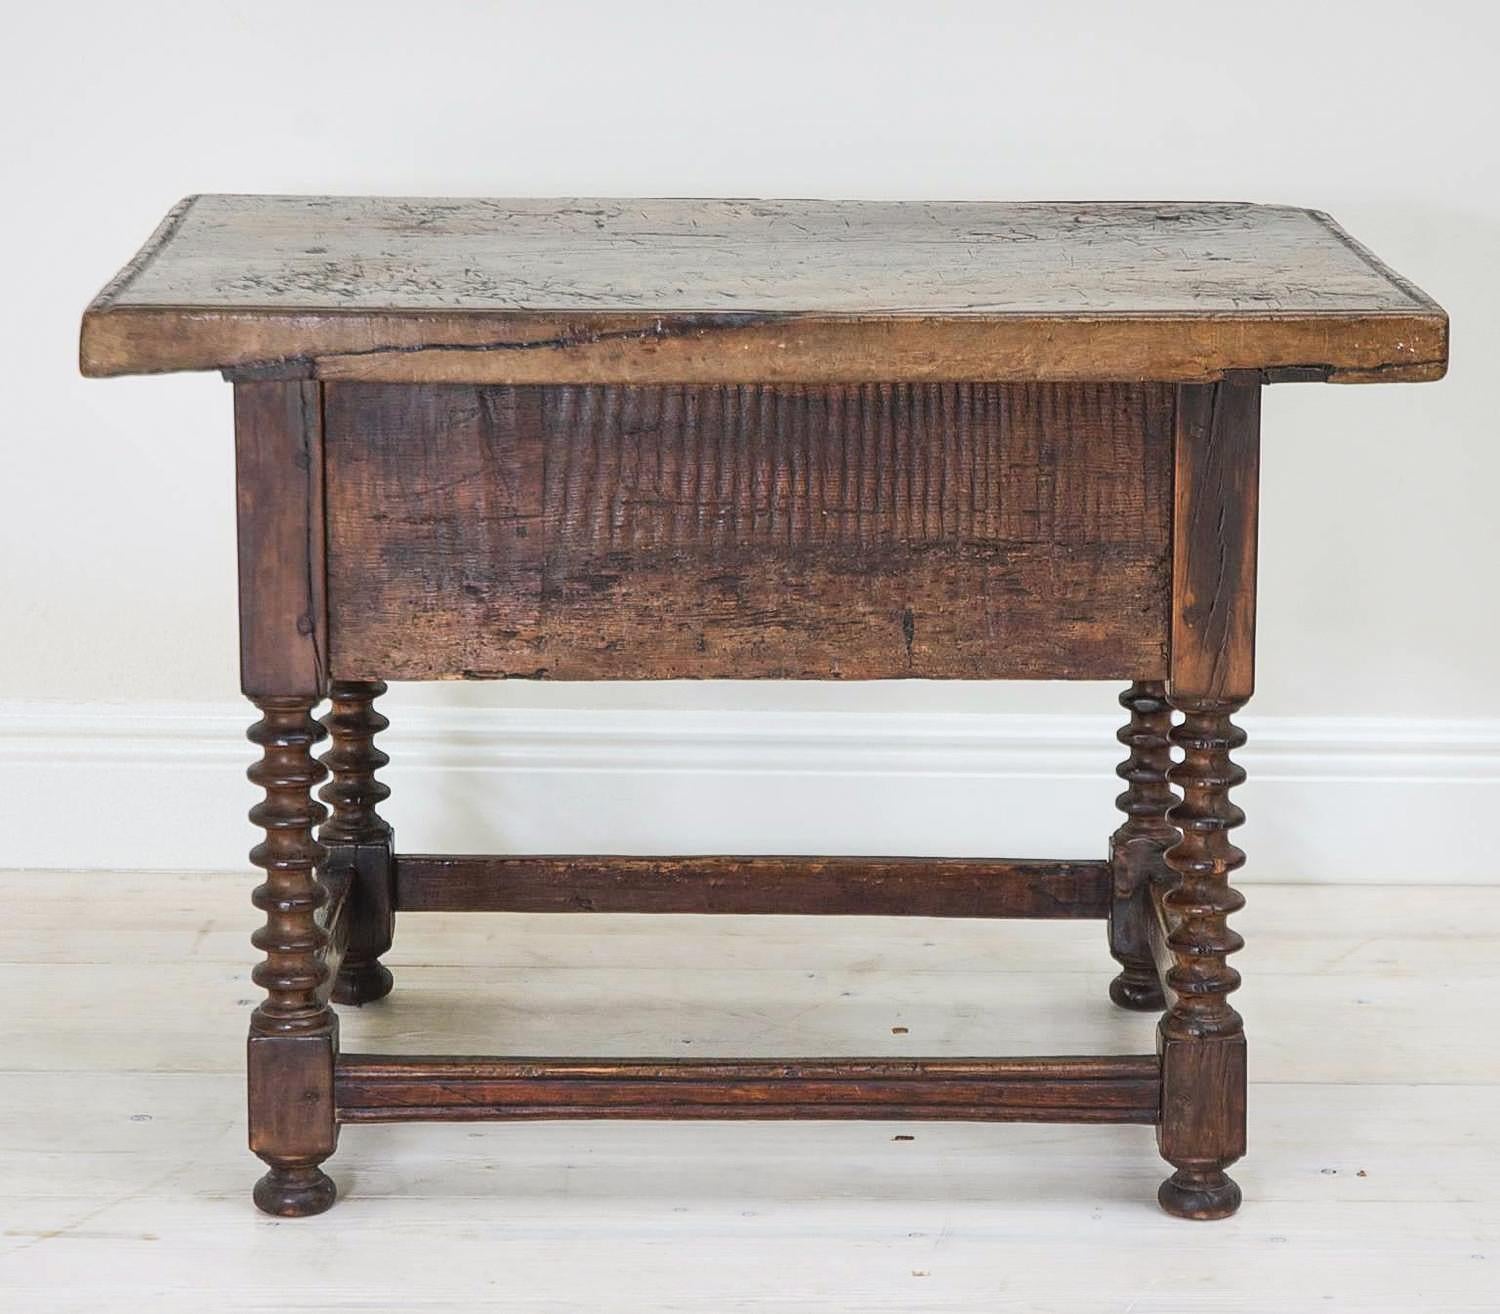 Hand-Carved 18th Century Rustic Spanish Small Shoemaker's Side Table with Spool Turned Legs For Sale